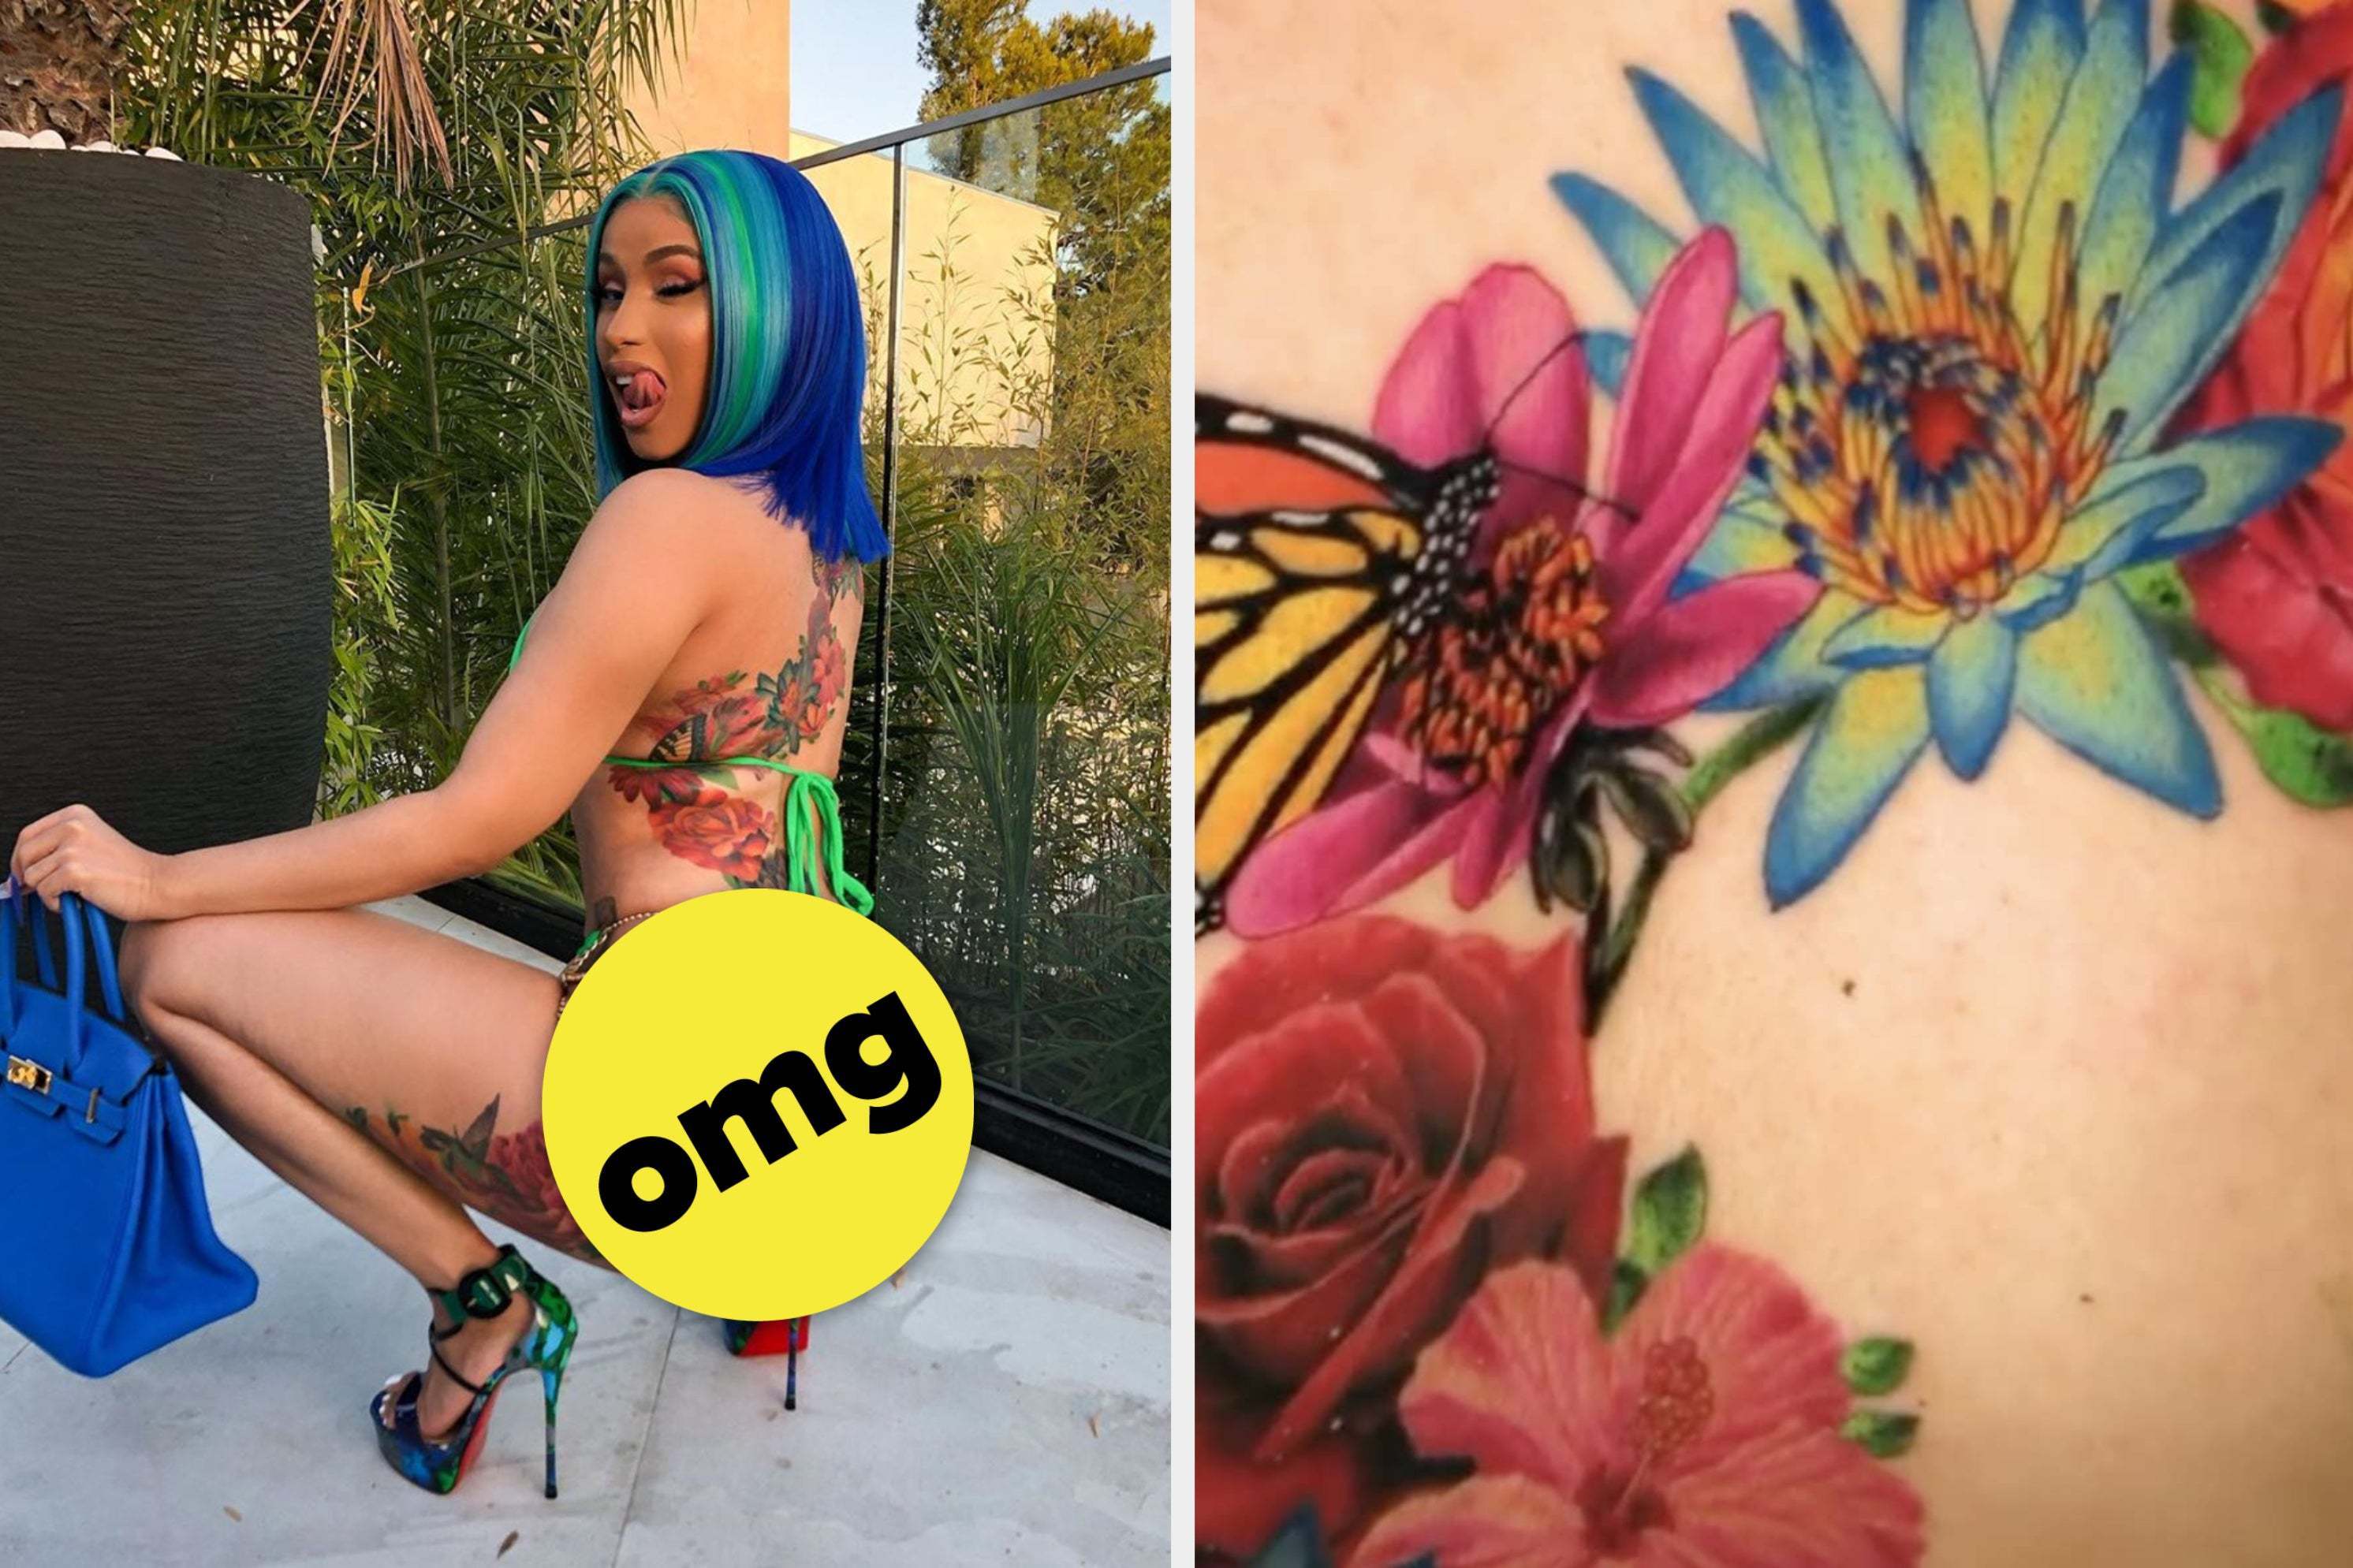 Man Who Sued Over His Tattoo Kinda Appearing On A Cardi B Cover Loses Pays  Legal Fees  Techdirt